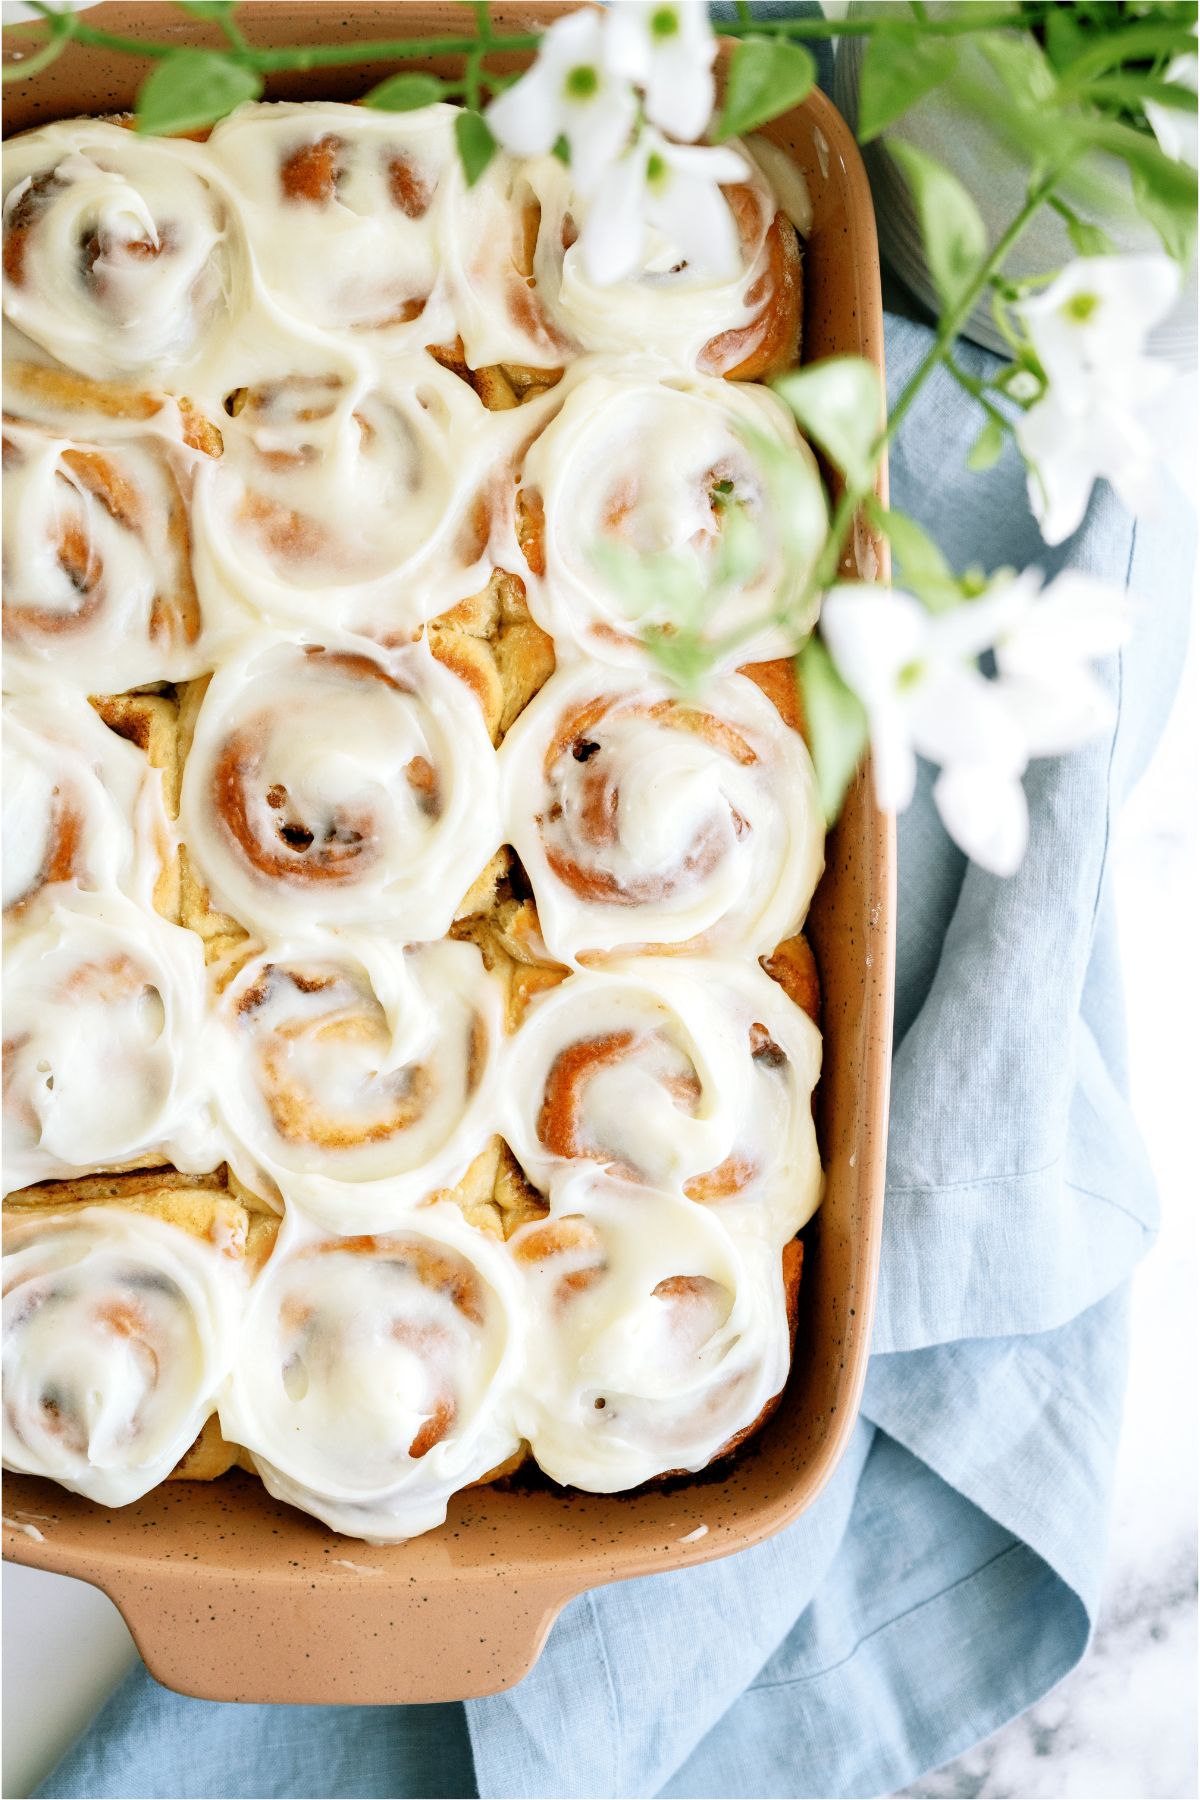 The BEST Homemade Cinnamon Rolls
in a pan